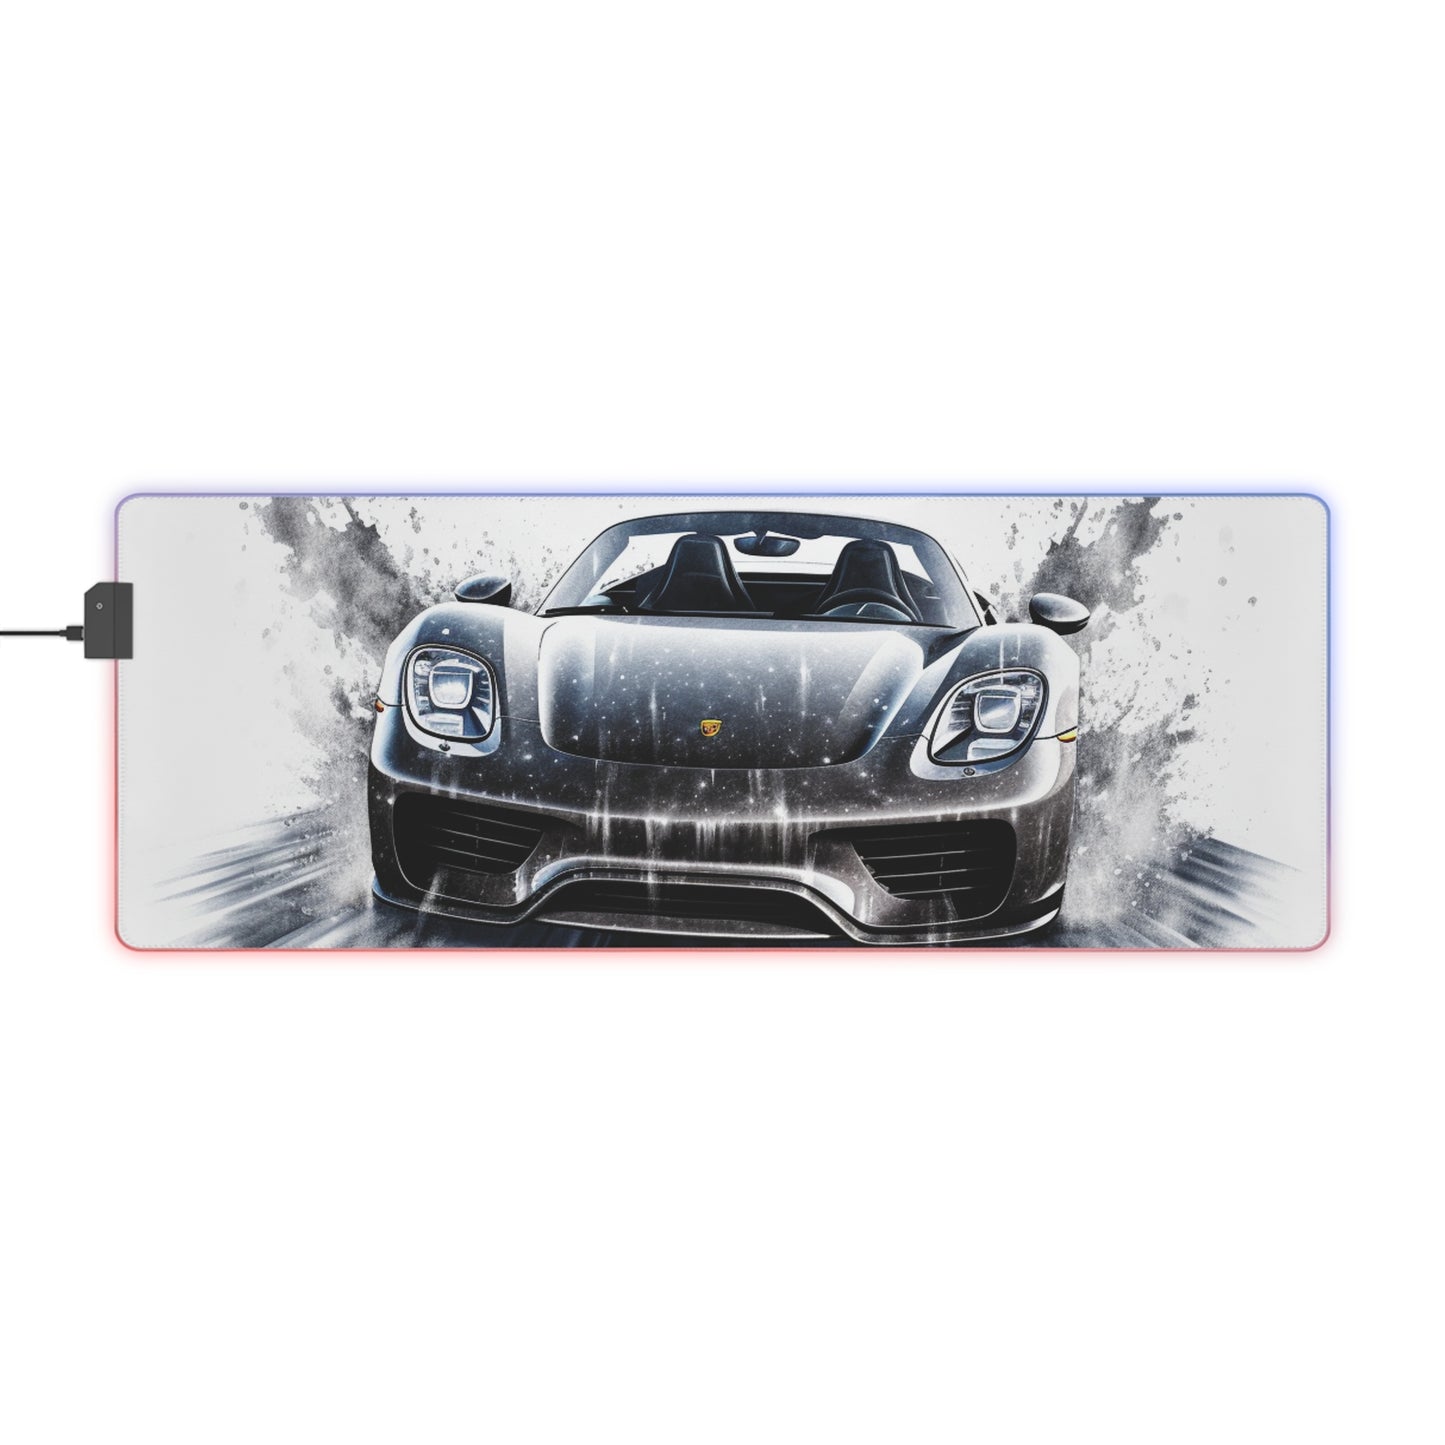 LED Gaming Mouse Pad 918 Spyder white background driving fast with water splashing 3